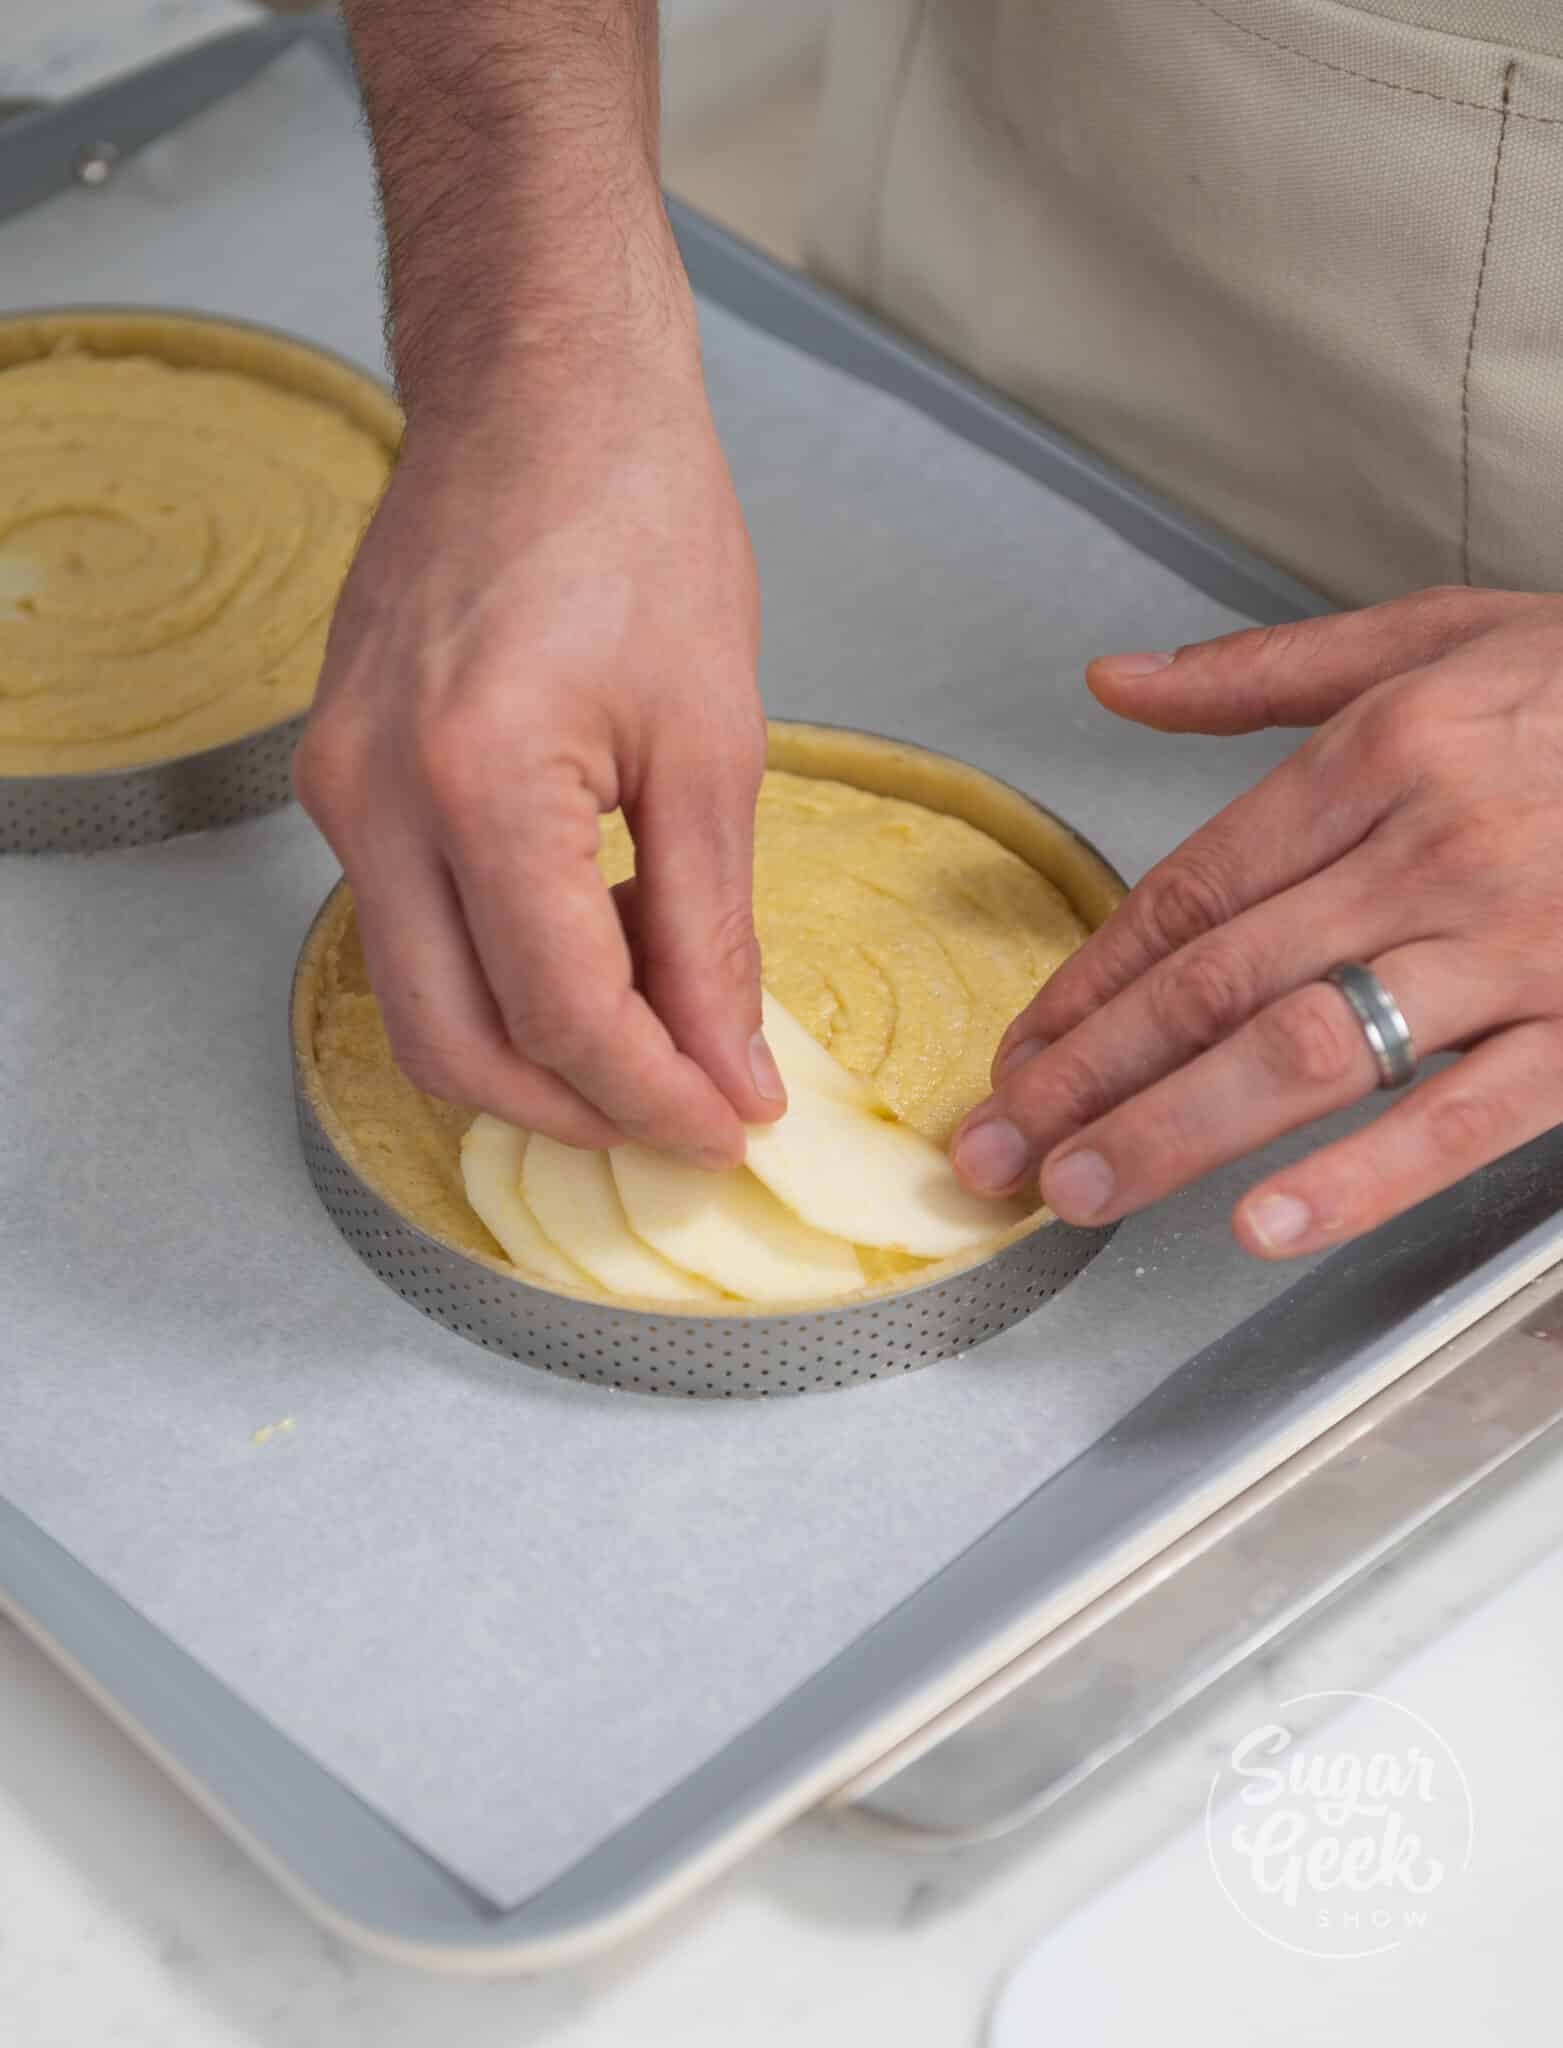 Hands placing apple slices nicely into tart.